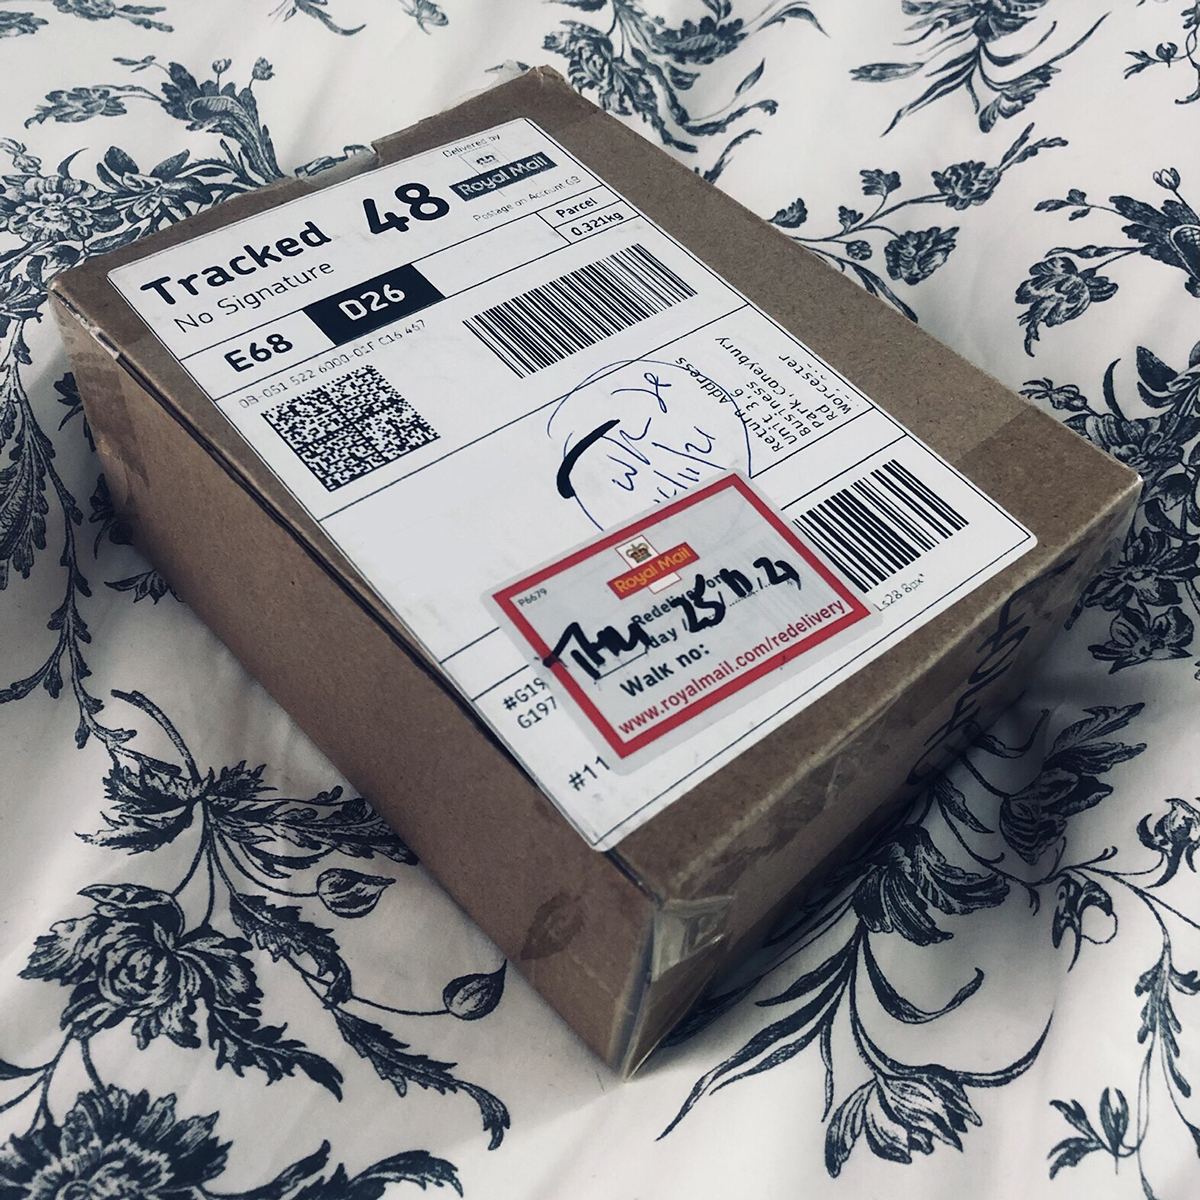 Lovense Discreet Packaging UK Delivery